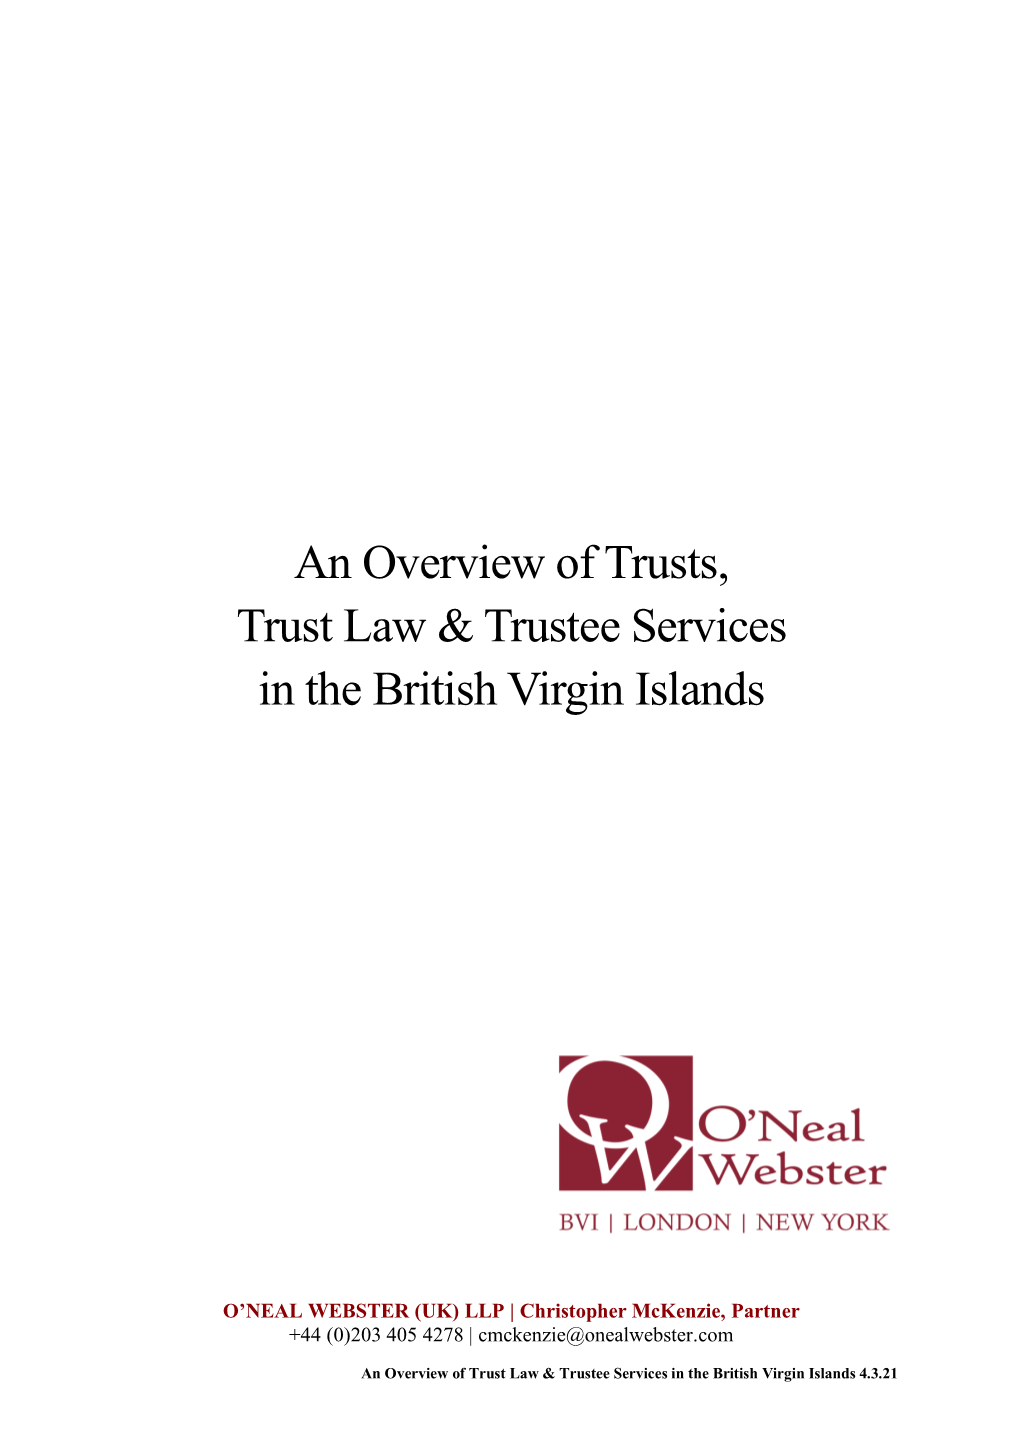 An Overview of Trusts, Trust Law & Trustee Services in the British Virgin Islands